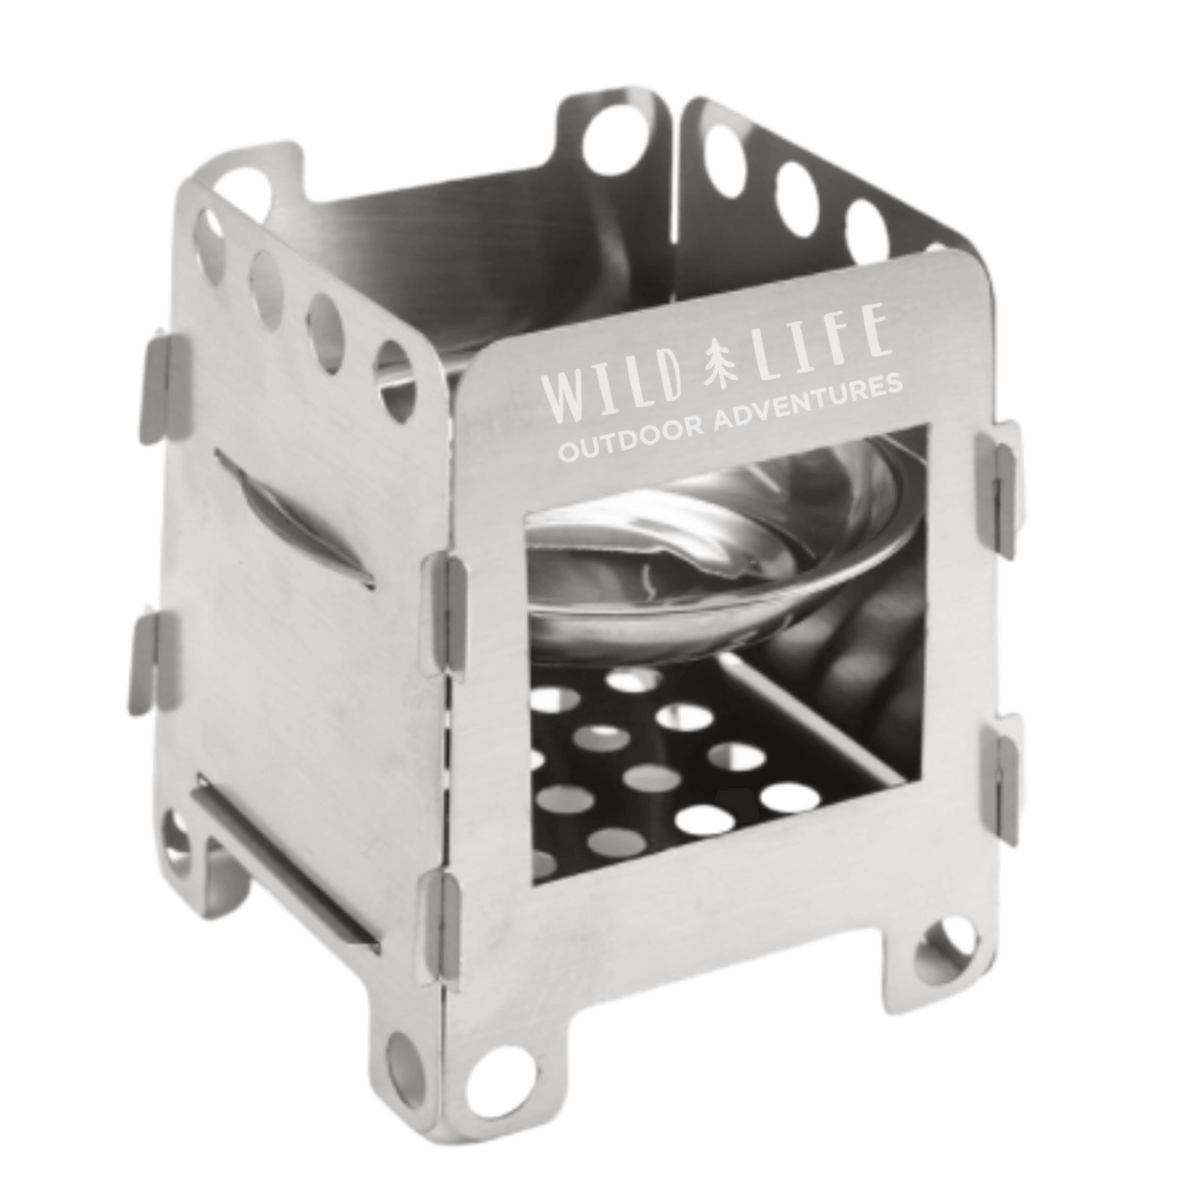 Stainless Steel Folding Stove - Wild | Life Outdoor Adventures